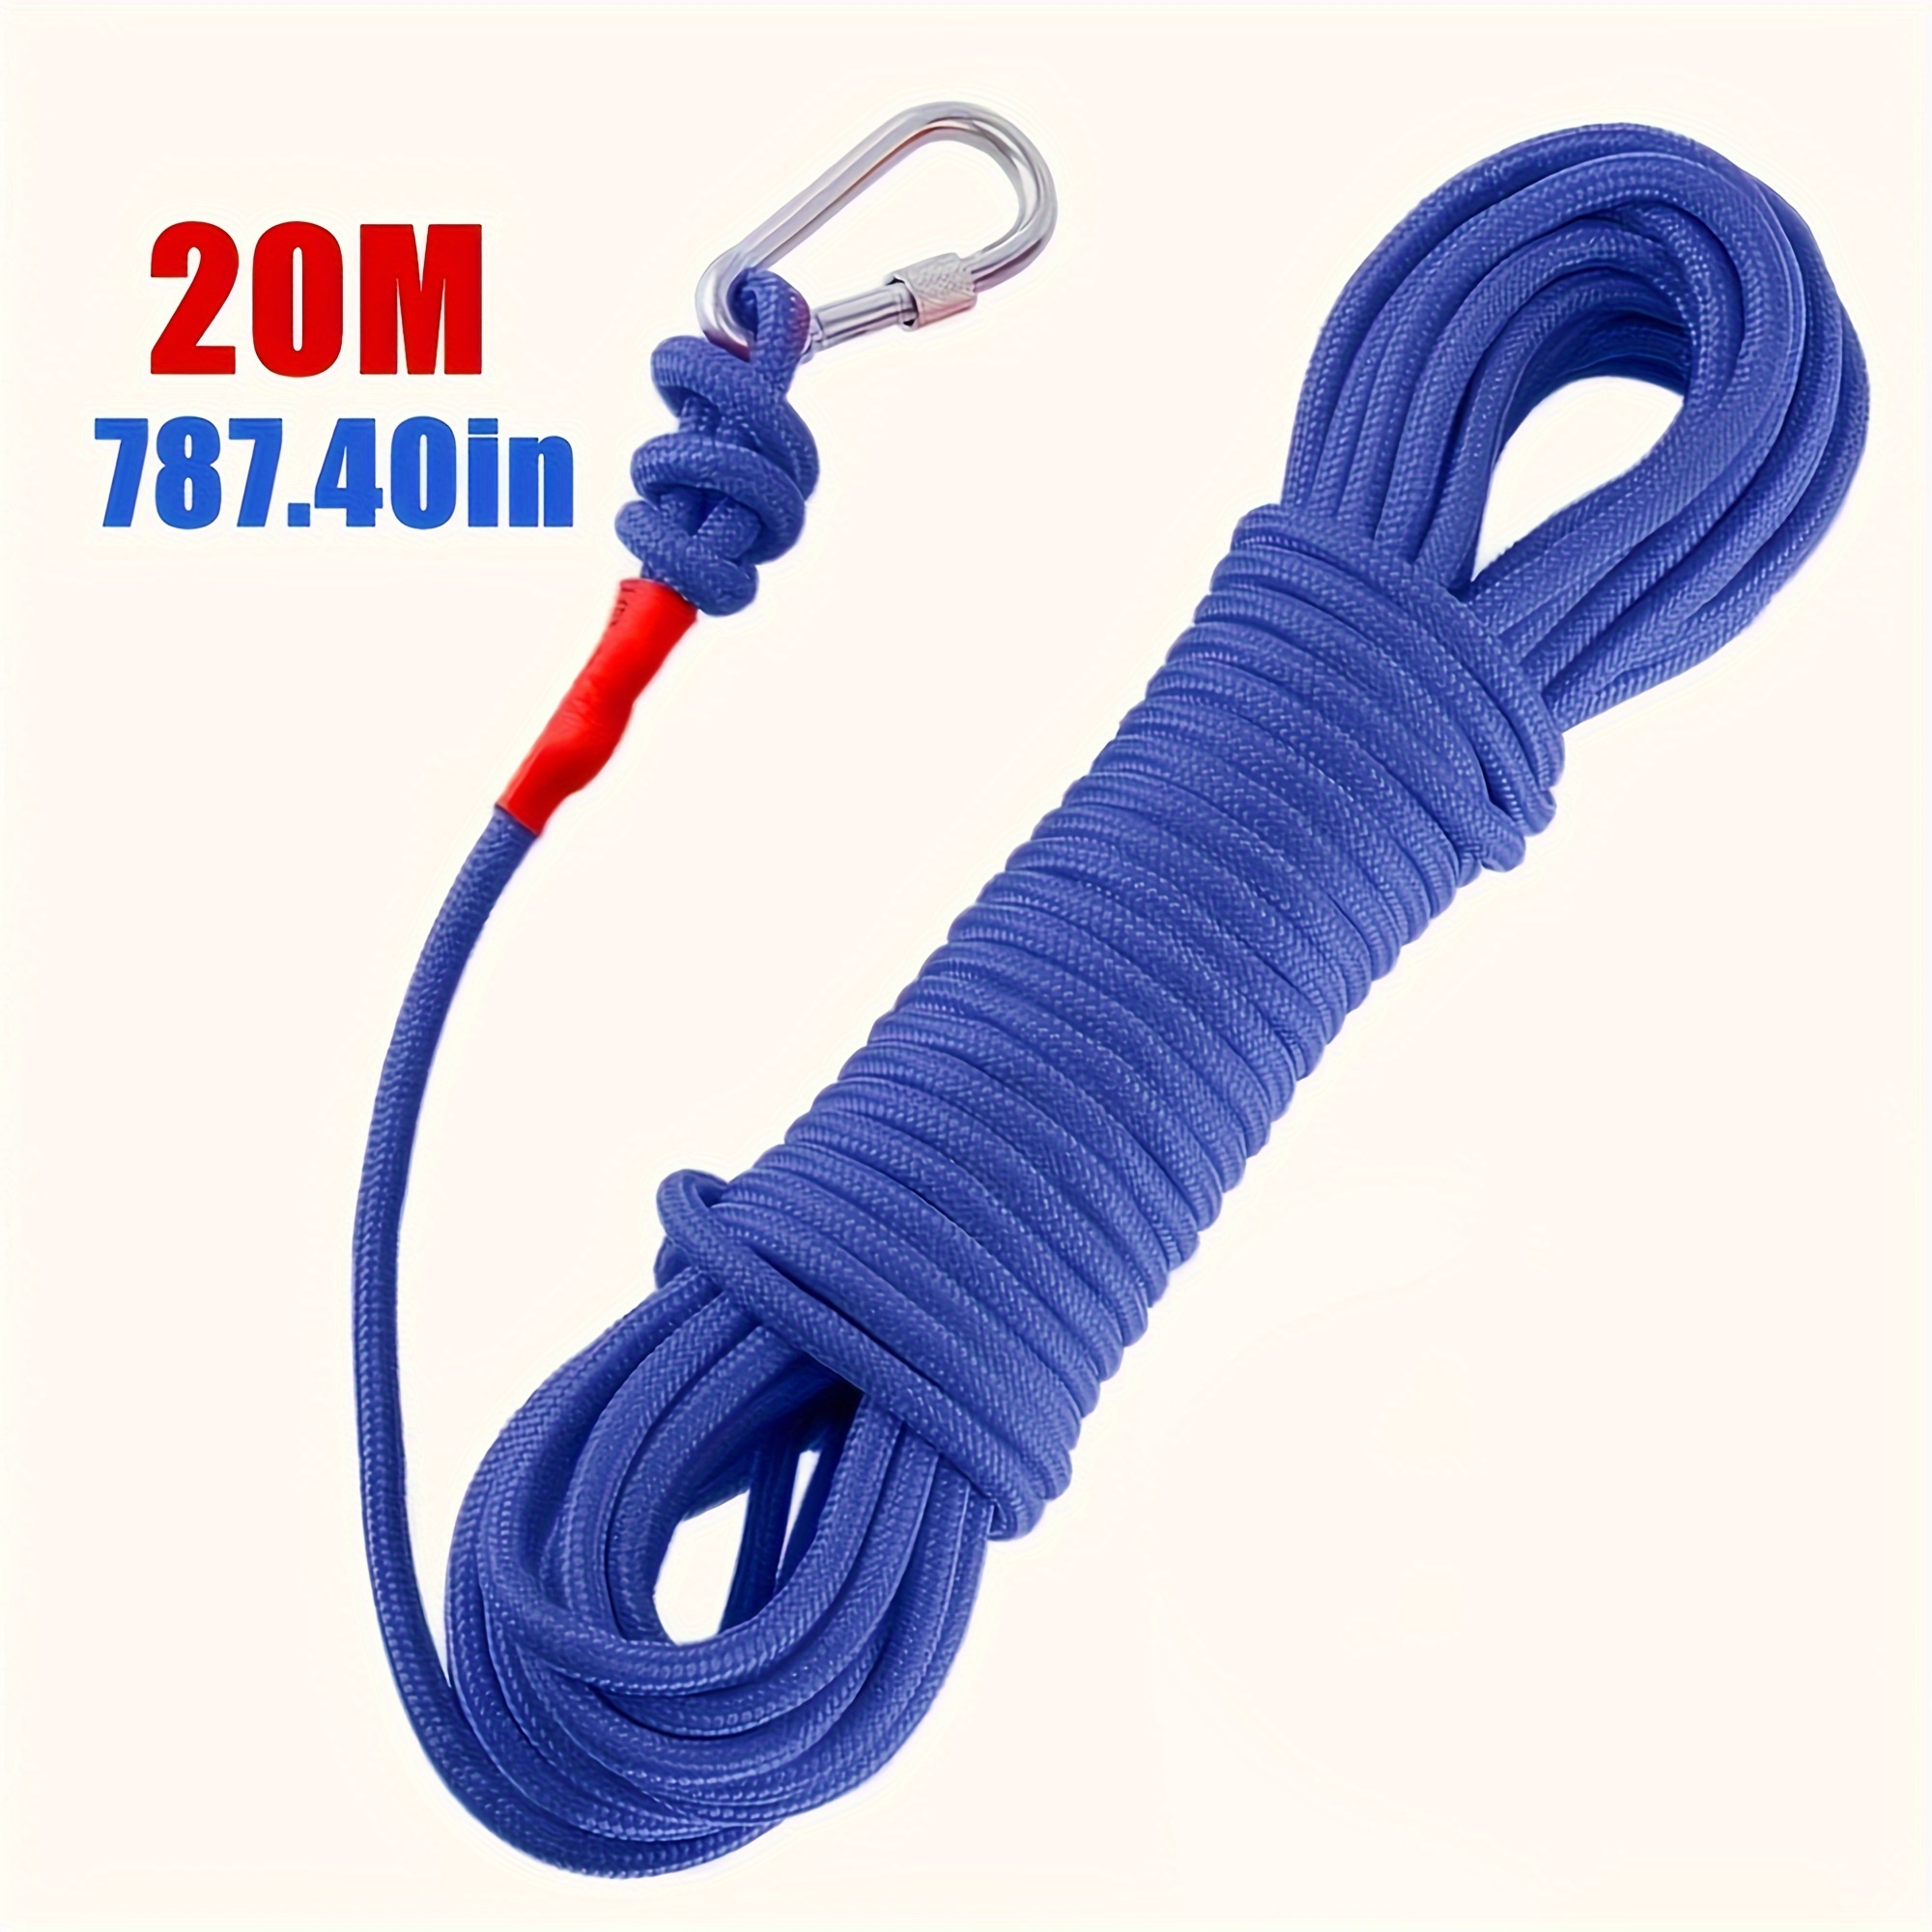 1pc 10m 20m Magnet Fishing Rope Carabiner Nylon Braided Rope Nylon Mooring  Line Anchor Clothesline Boat Anchor Crafting Blocking Pulling Draging Cargo  Tying Tow Rope Paracord Leash, Today's Best Daily Deals